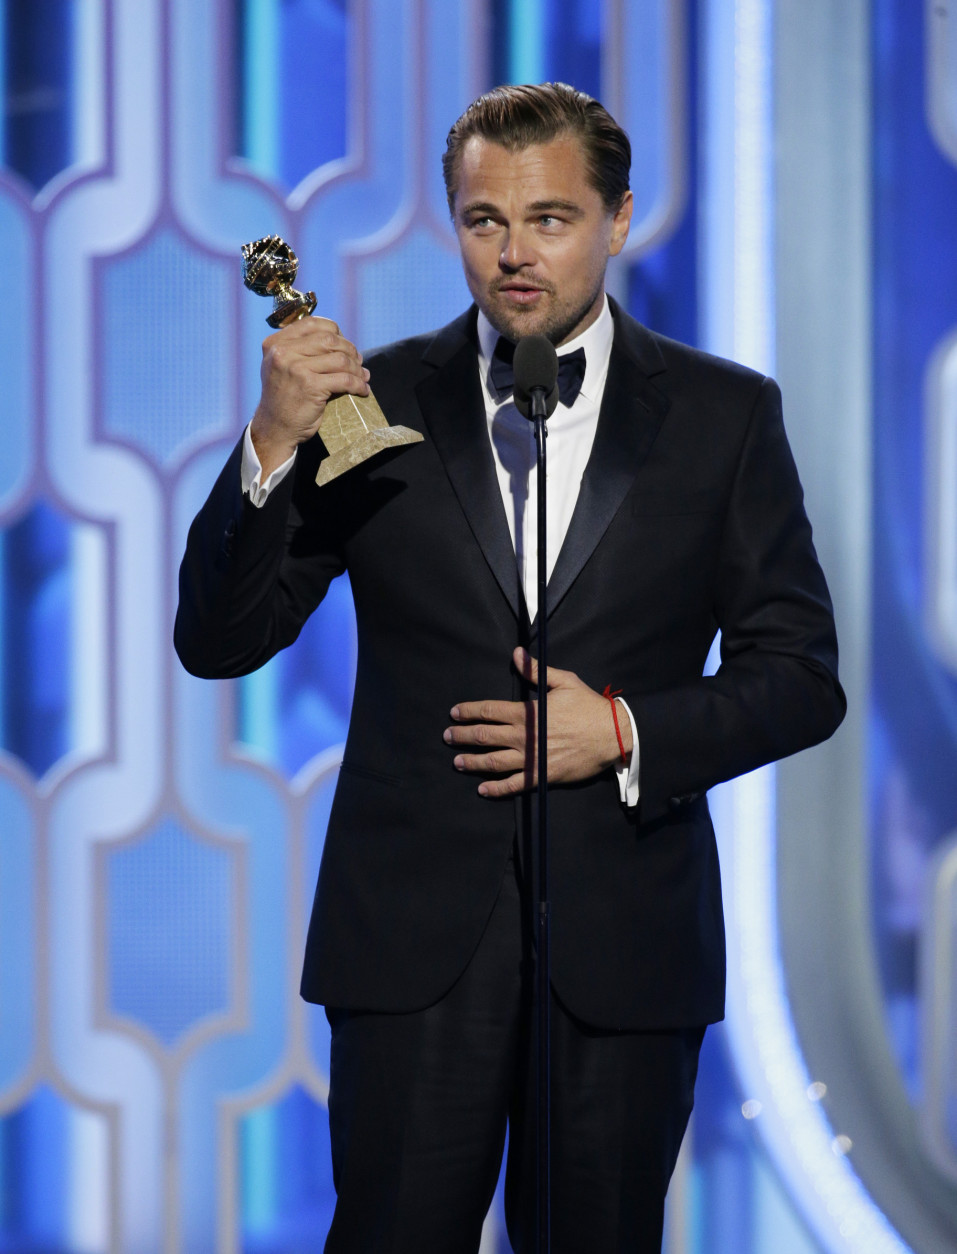 In this image released by NBC, Leonardo DiCaprio accepts the award for best actor in a motion picture drama for his role in "The Revenant" during the 73rd Annual Golden Globe Awards at the Beverly Hilton Hotel in Beverly Hills, Calif., on Sunday, Jan. 10, 2016. (Paul Drinkwater/NBC via AP)